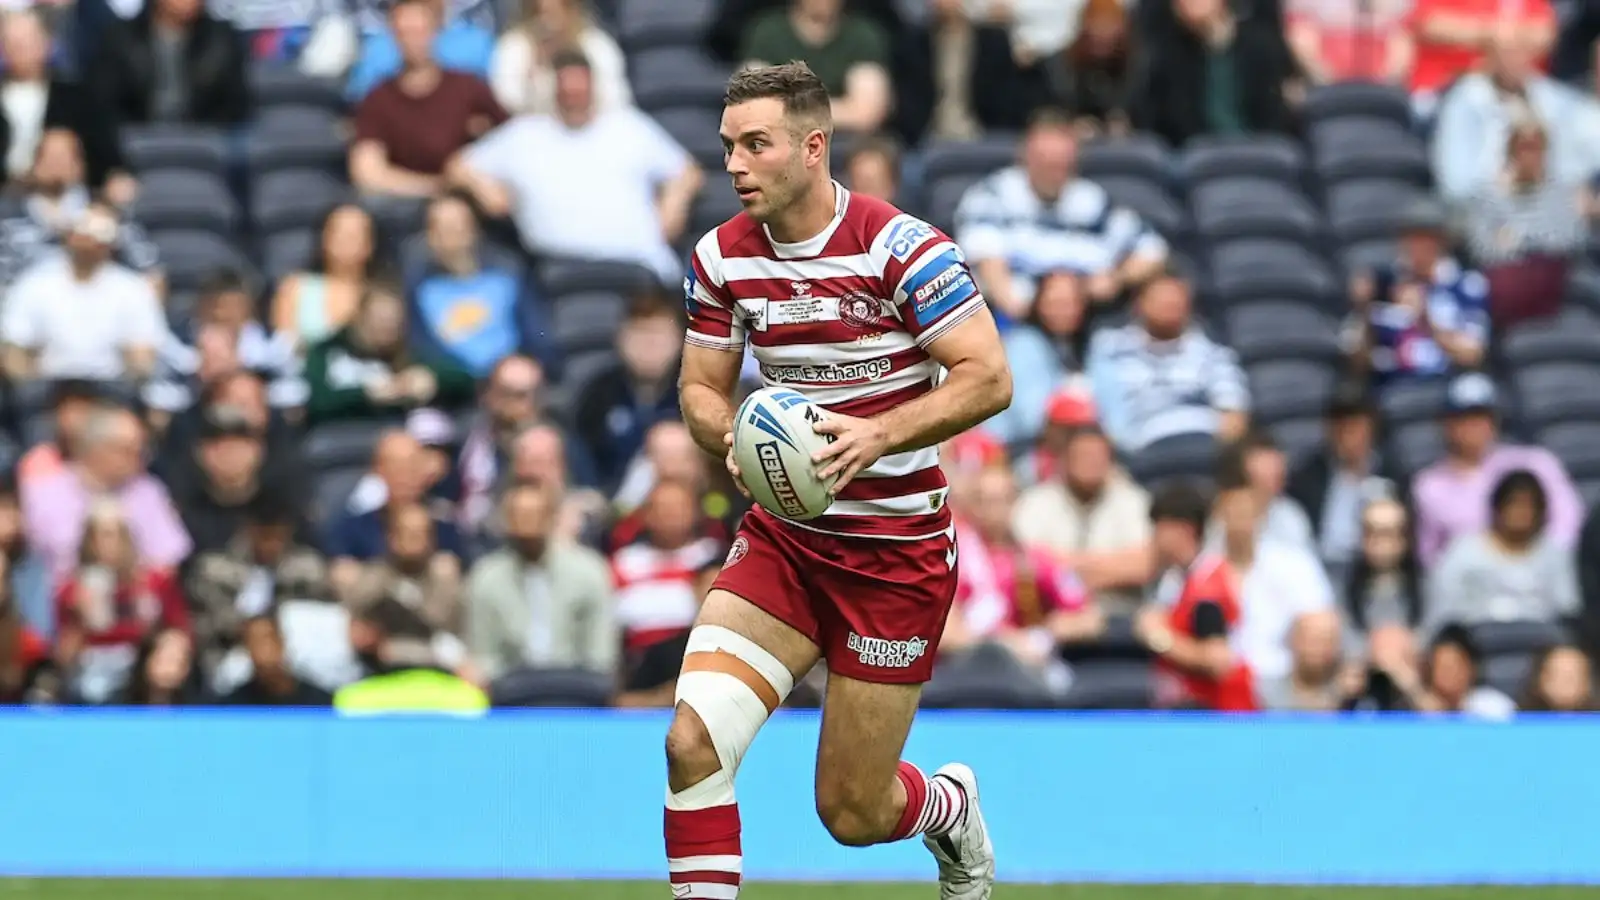 Wigan centre Iain Thornley makes Championship loan move